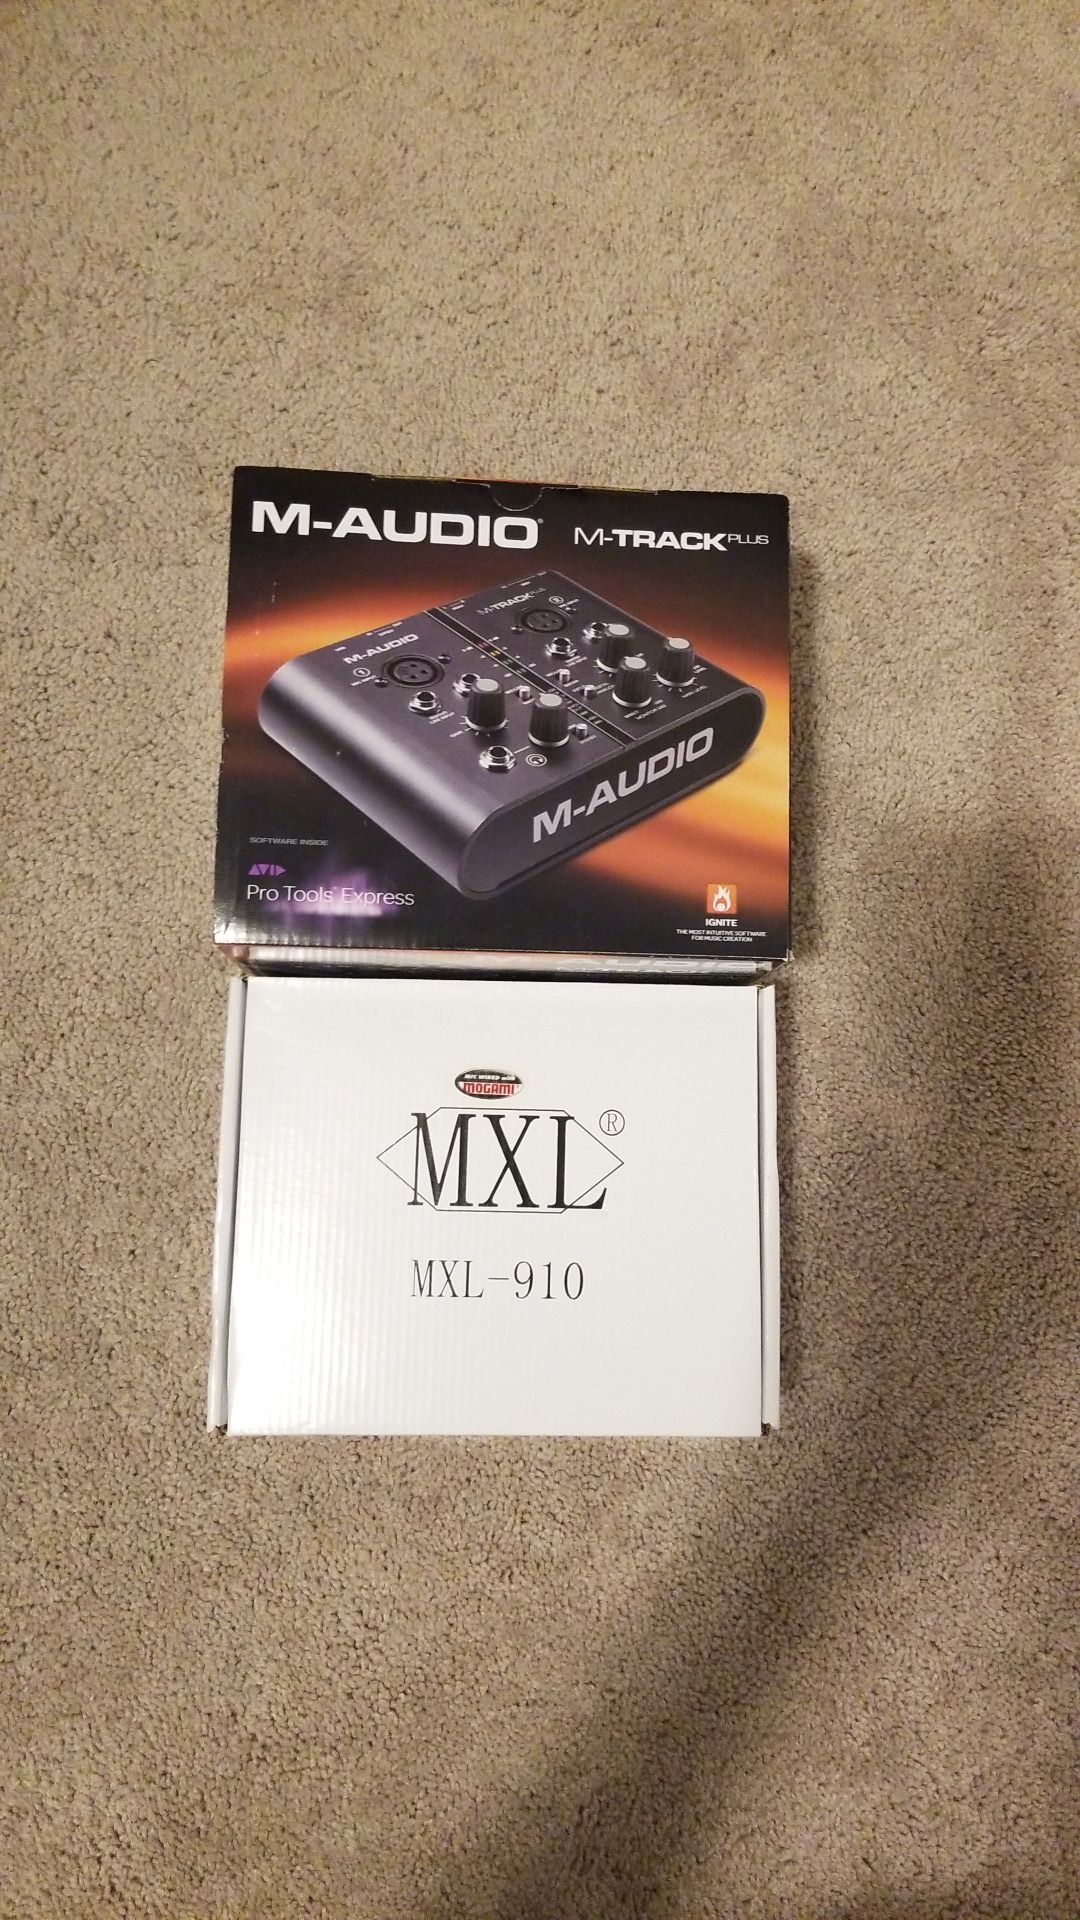 M-Audio M-Track Plus Audio Interface with Pro Tools and MXL 910 Microphone with pop filter